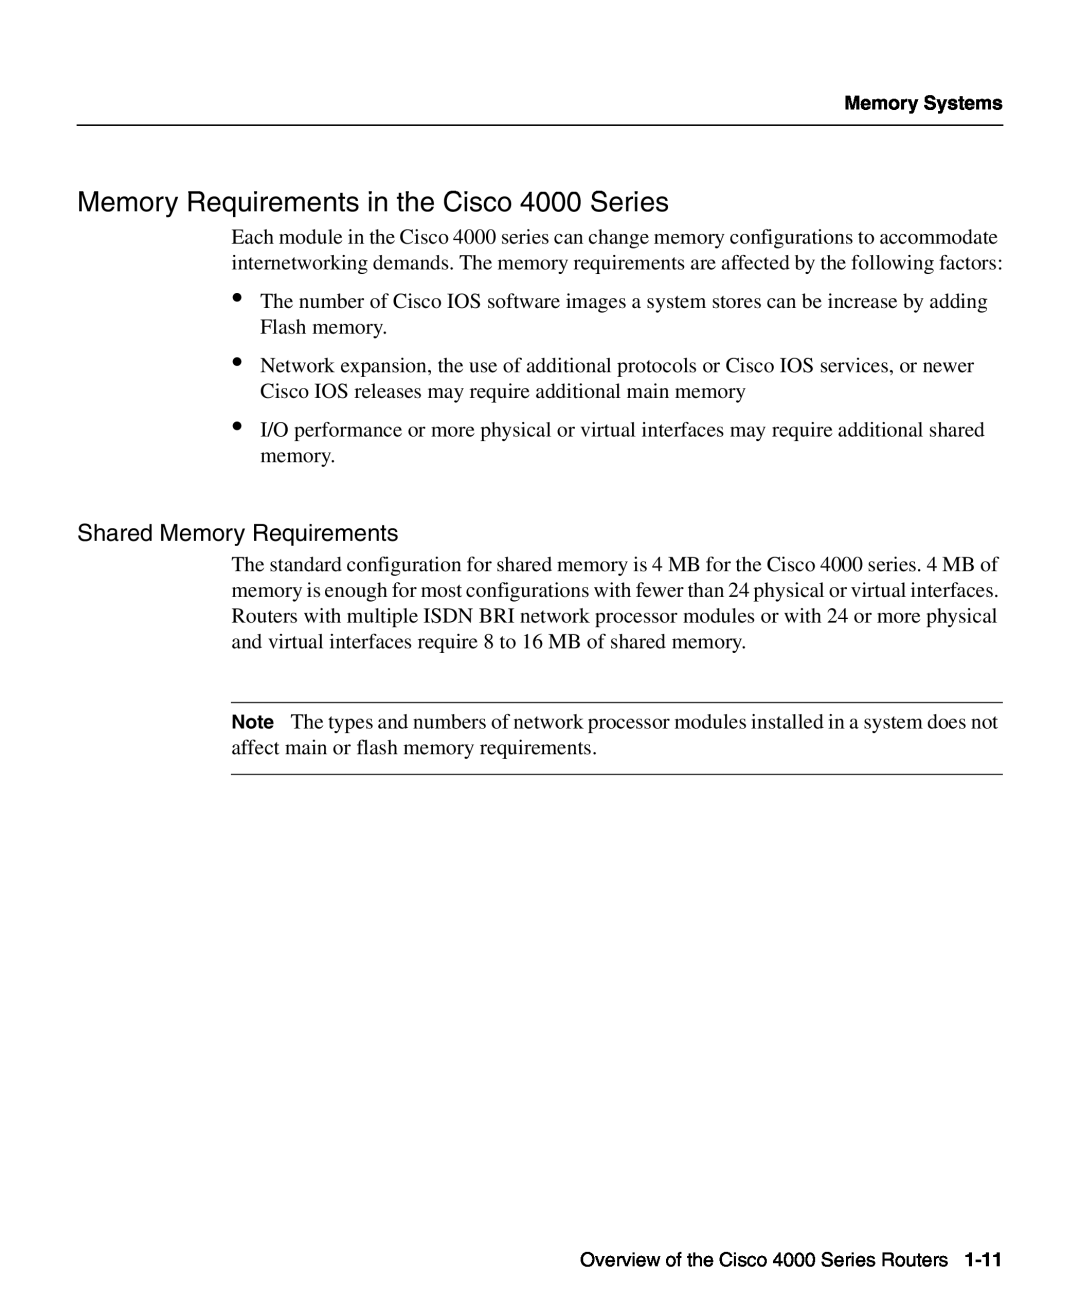 Cisco Systems manual Memory Requirements in the Cisco 4000 Series, Shared Memory Requirements 